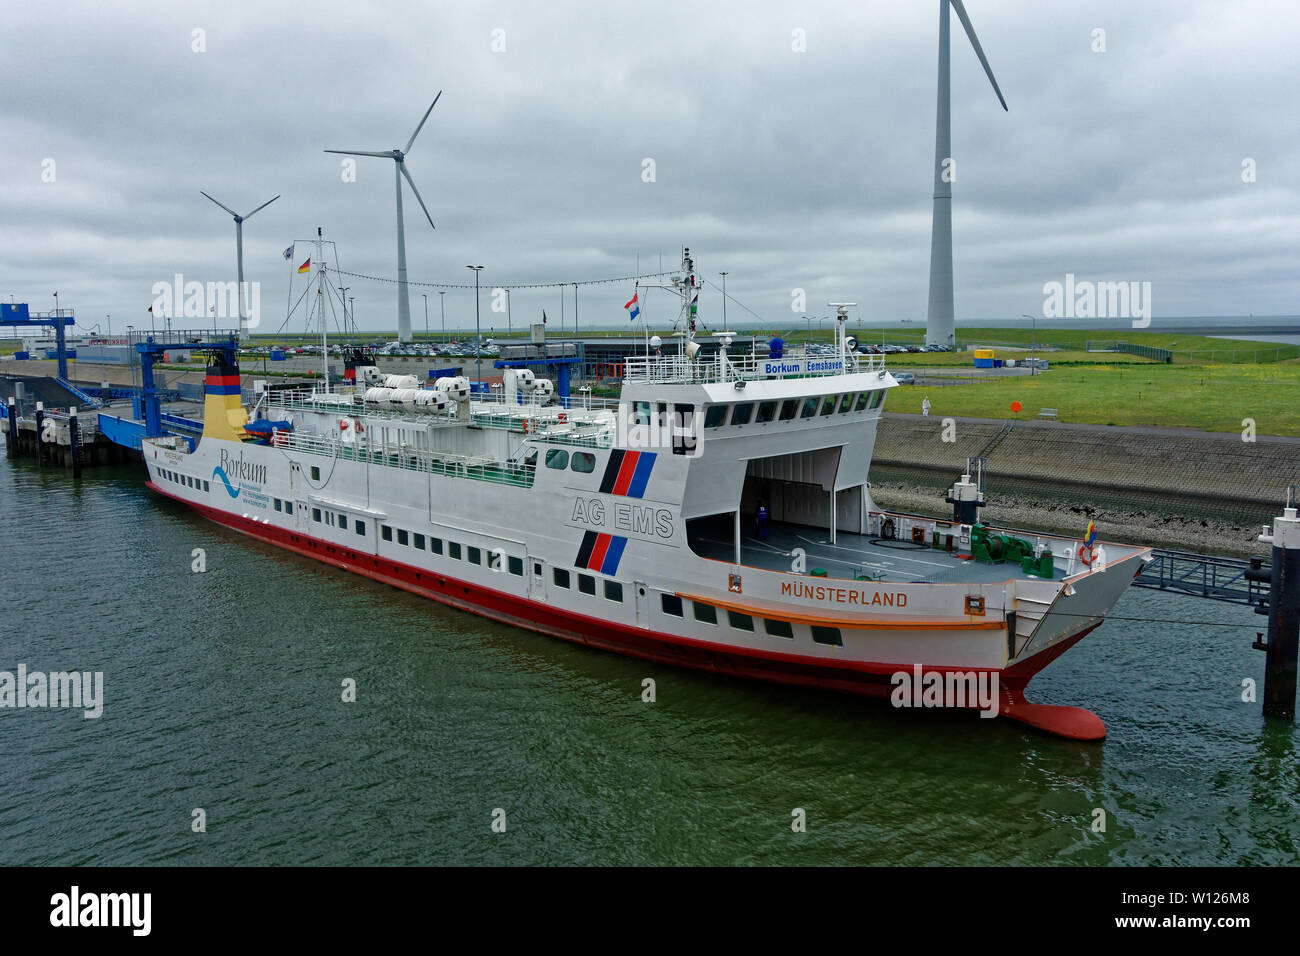 A ferry Eemshaven Port, Netherlands, Stock Photo